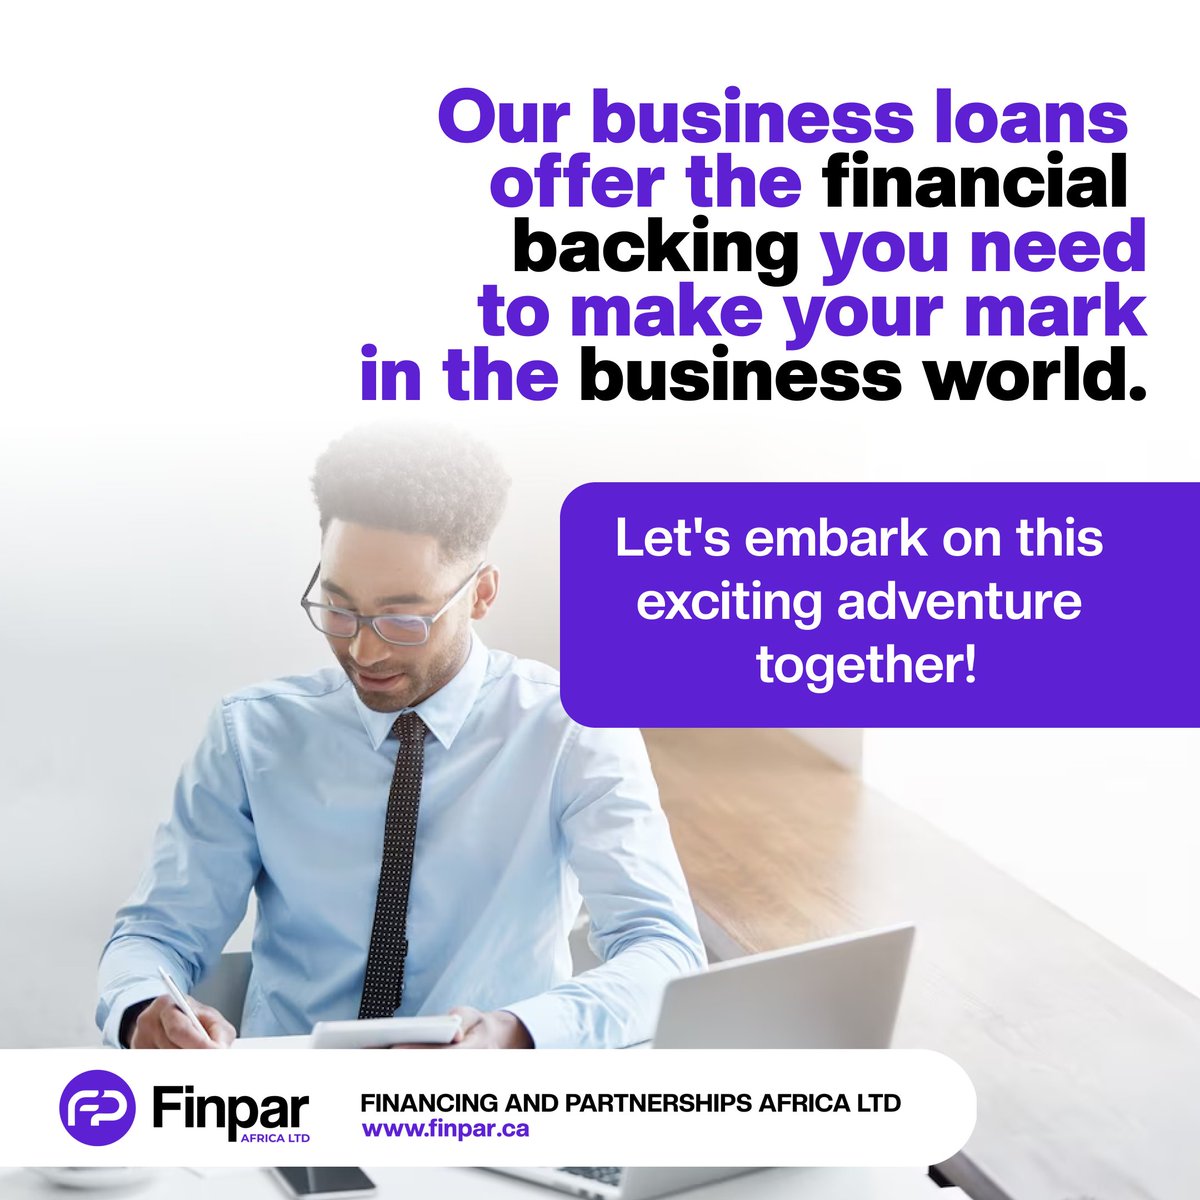 Are you ready to take your entrepreneurial journey to the next level? Our business loans offer the financial backing you need to make your mark in the business world. Let's embark on this exciting adventure together! #BusinessLoans #Entrepreneurship #FinancialBackbone